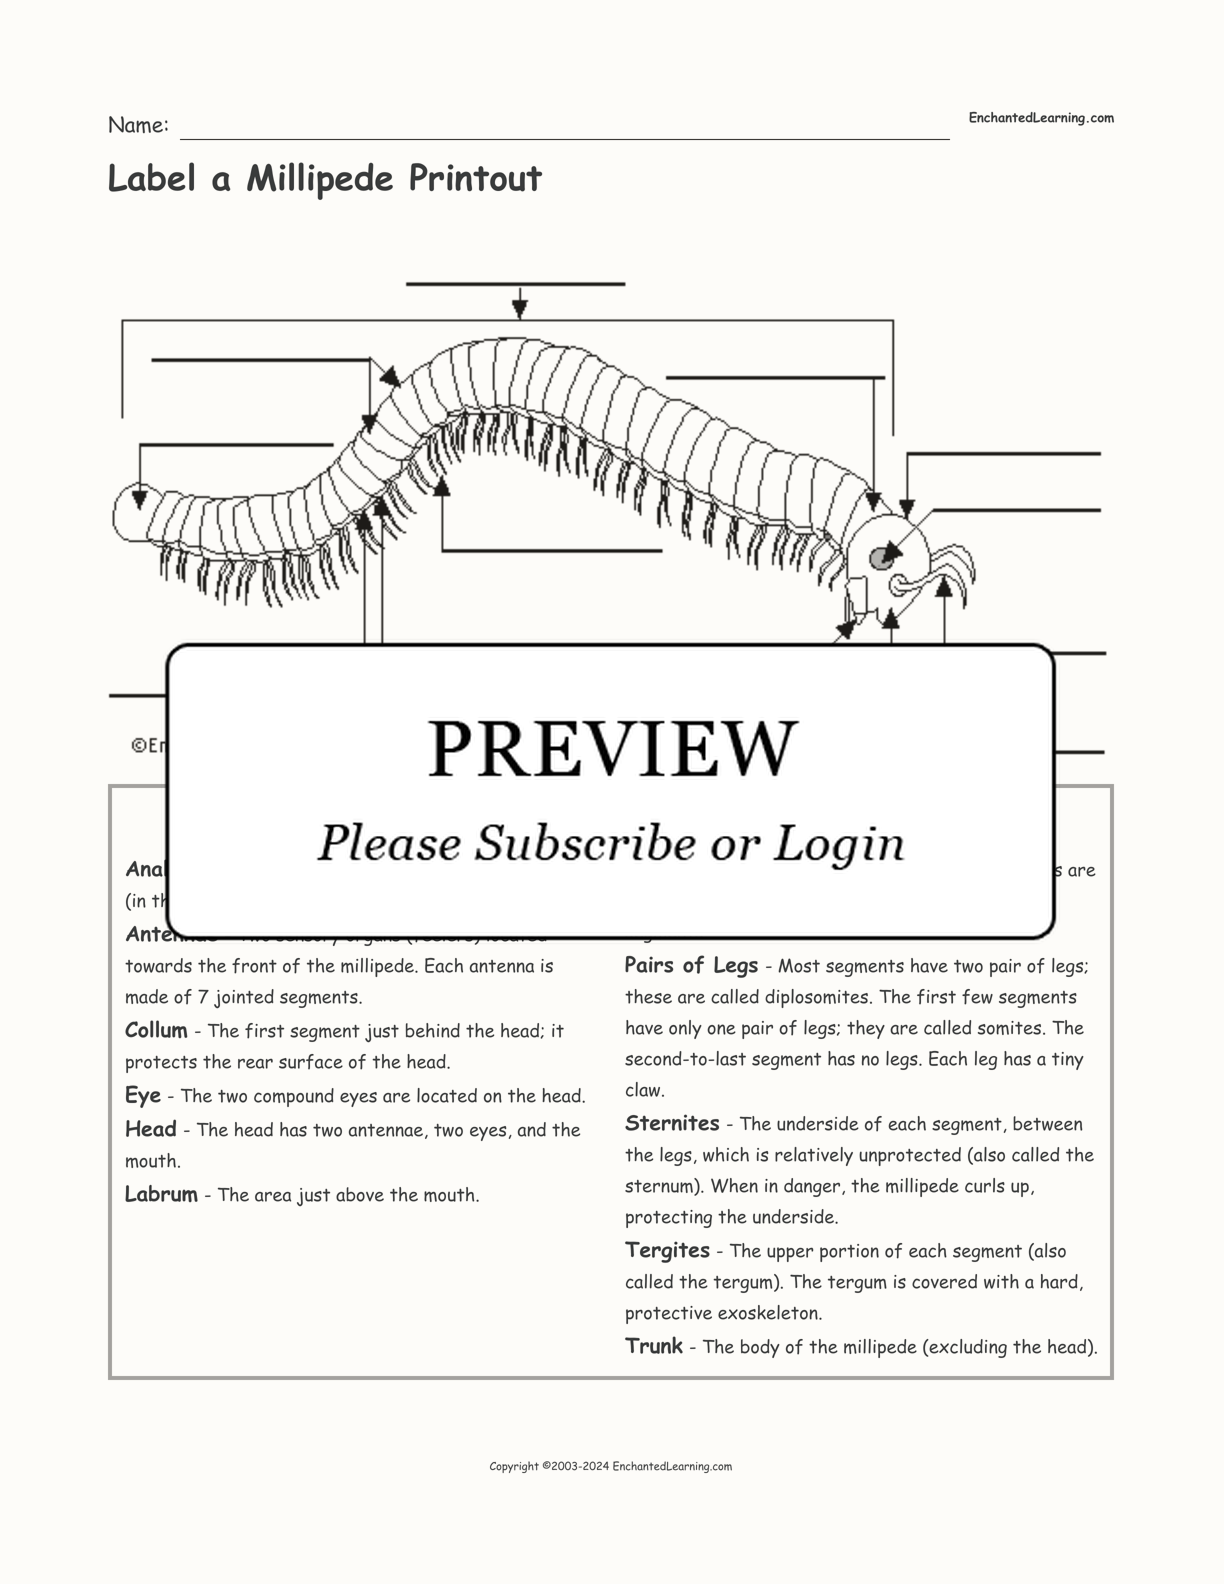 Label a Millipede Printout interactive worksheet page 1